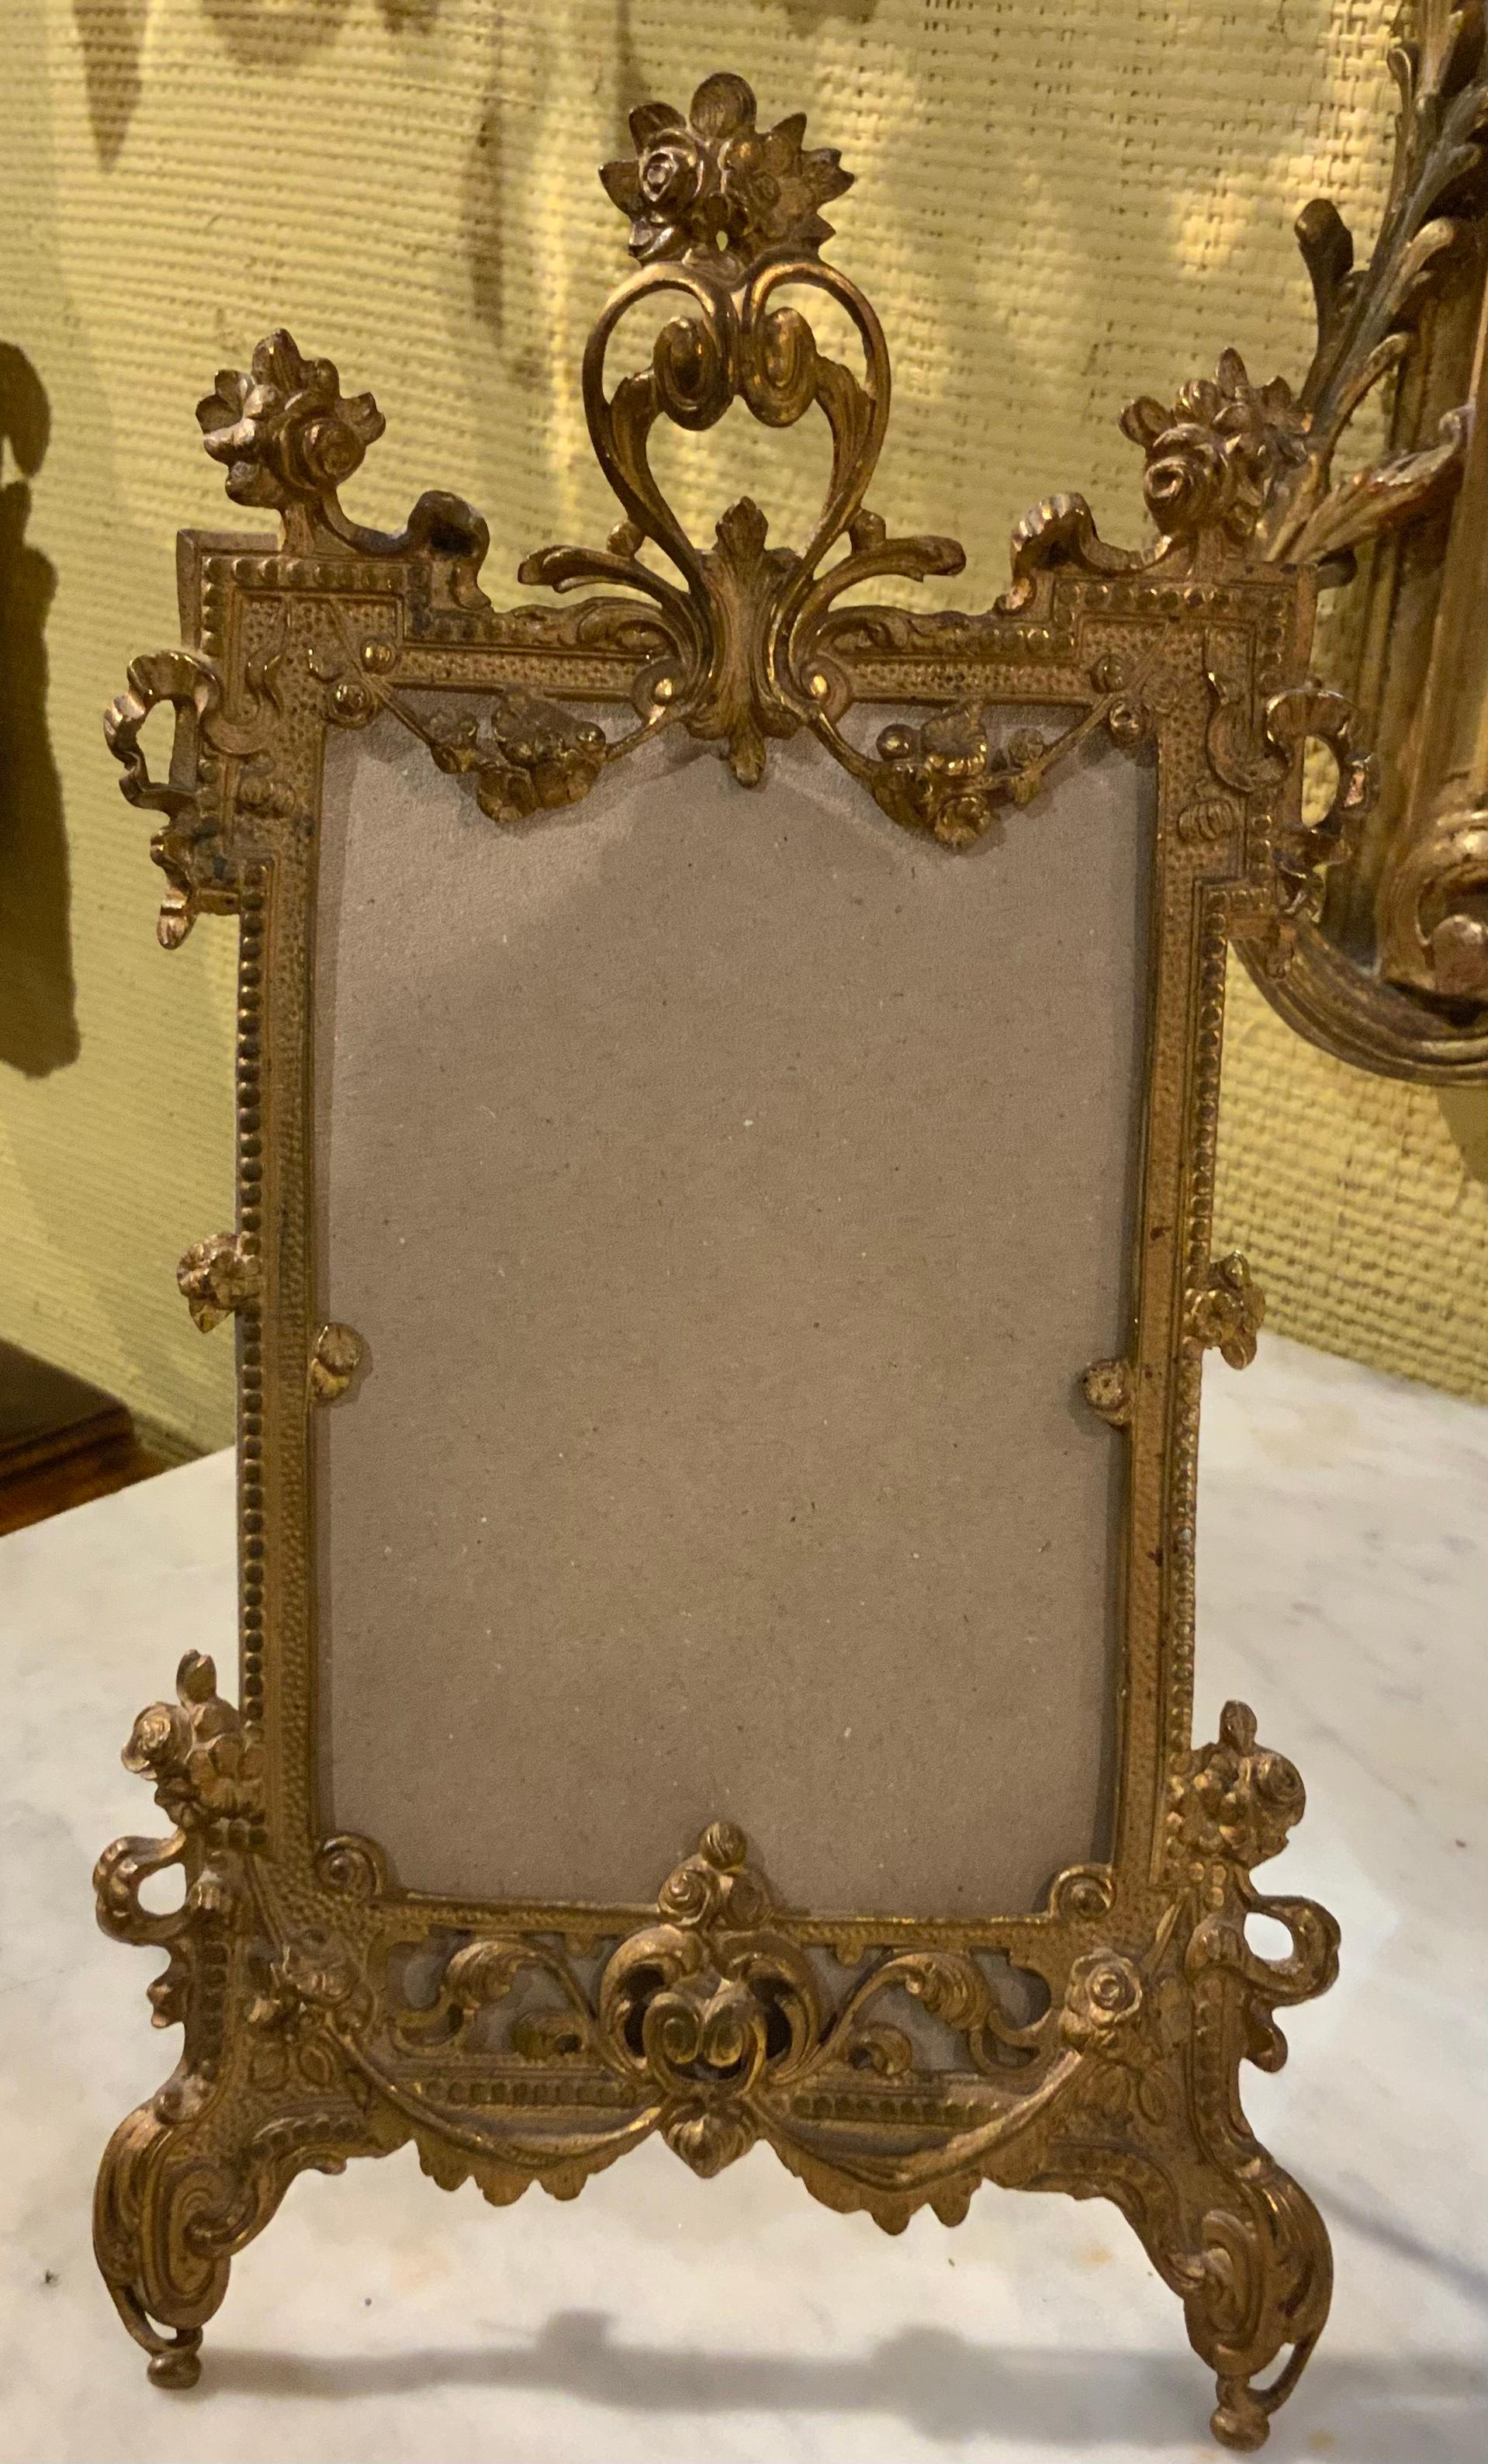 Exquisite bronze dore French desk top frame with an
Easel back to support the frame. The gilding is original
In a beautiful antique patina. Rococo in style with many
Curves and flourishes with a floral and foliate motif
Throughout. An oval heart